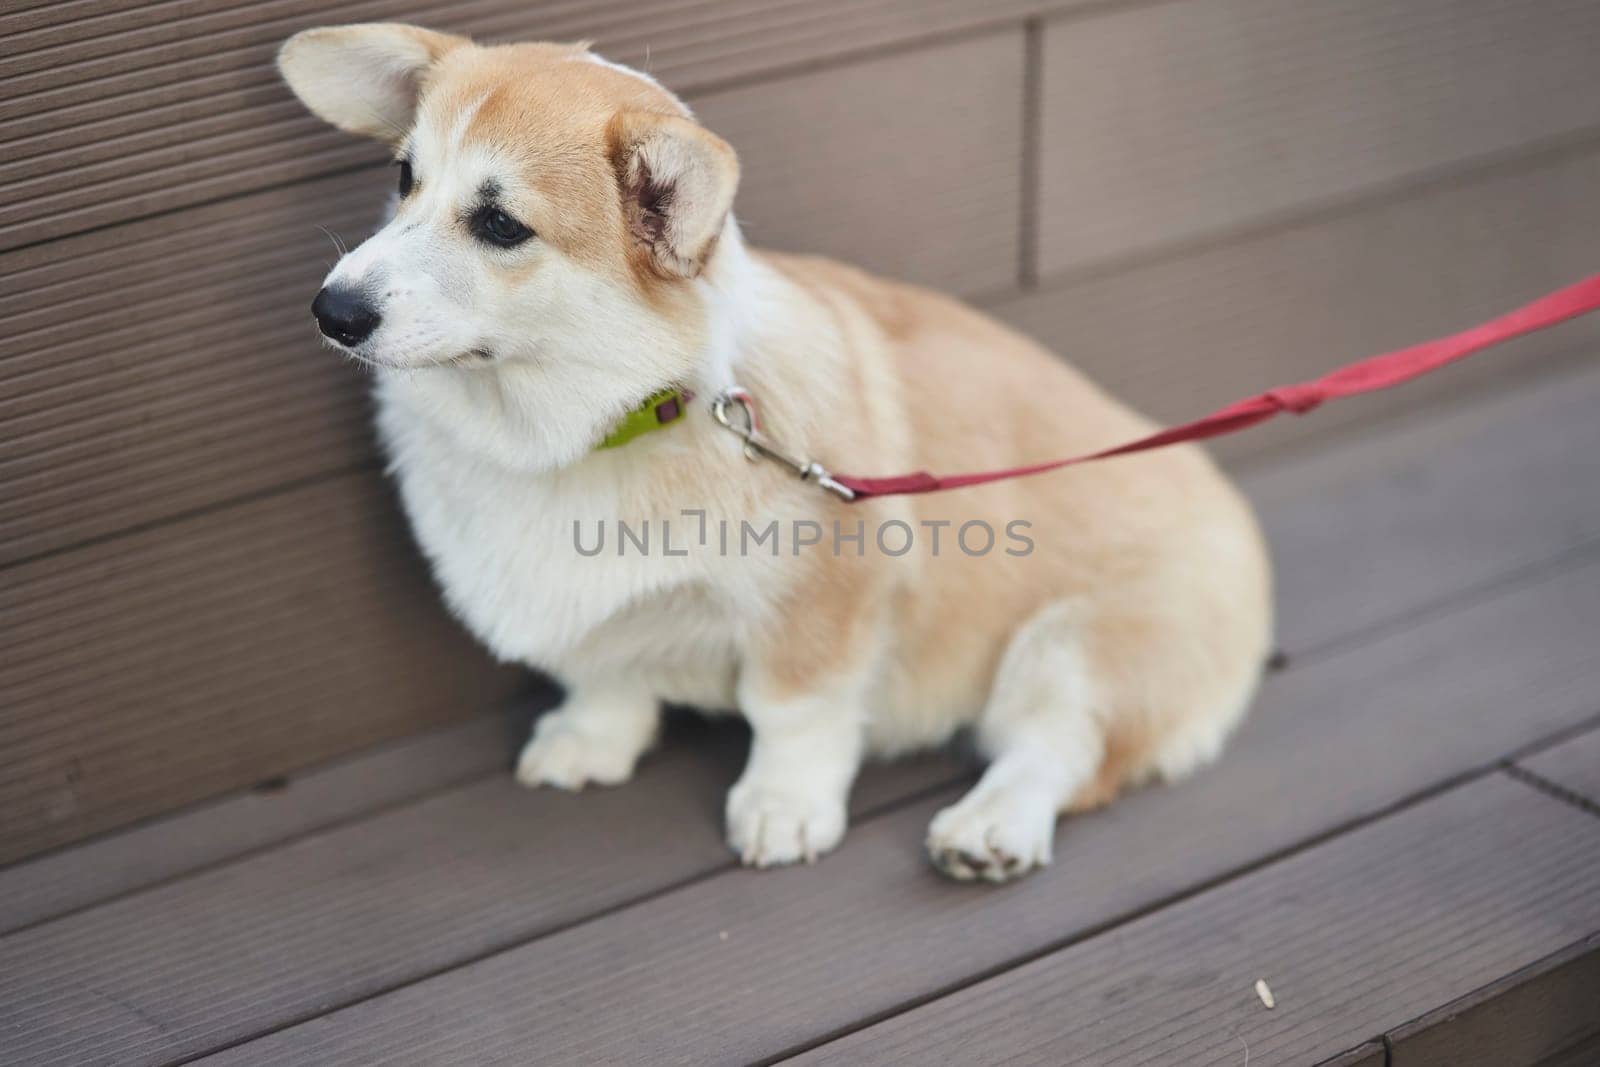 Welsh Corgi dog sitting outdoors by driver-s